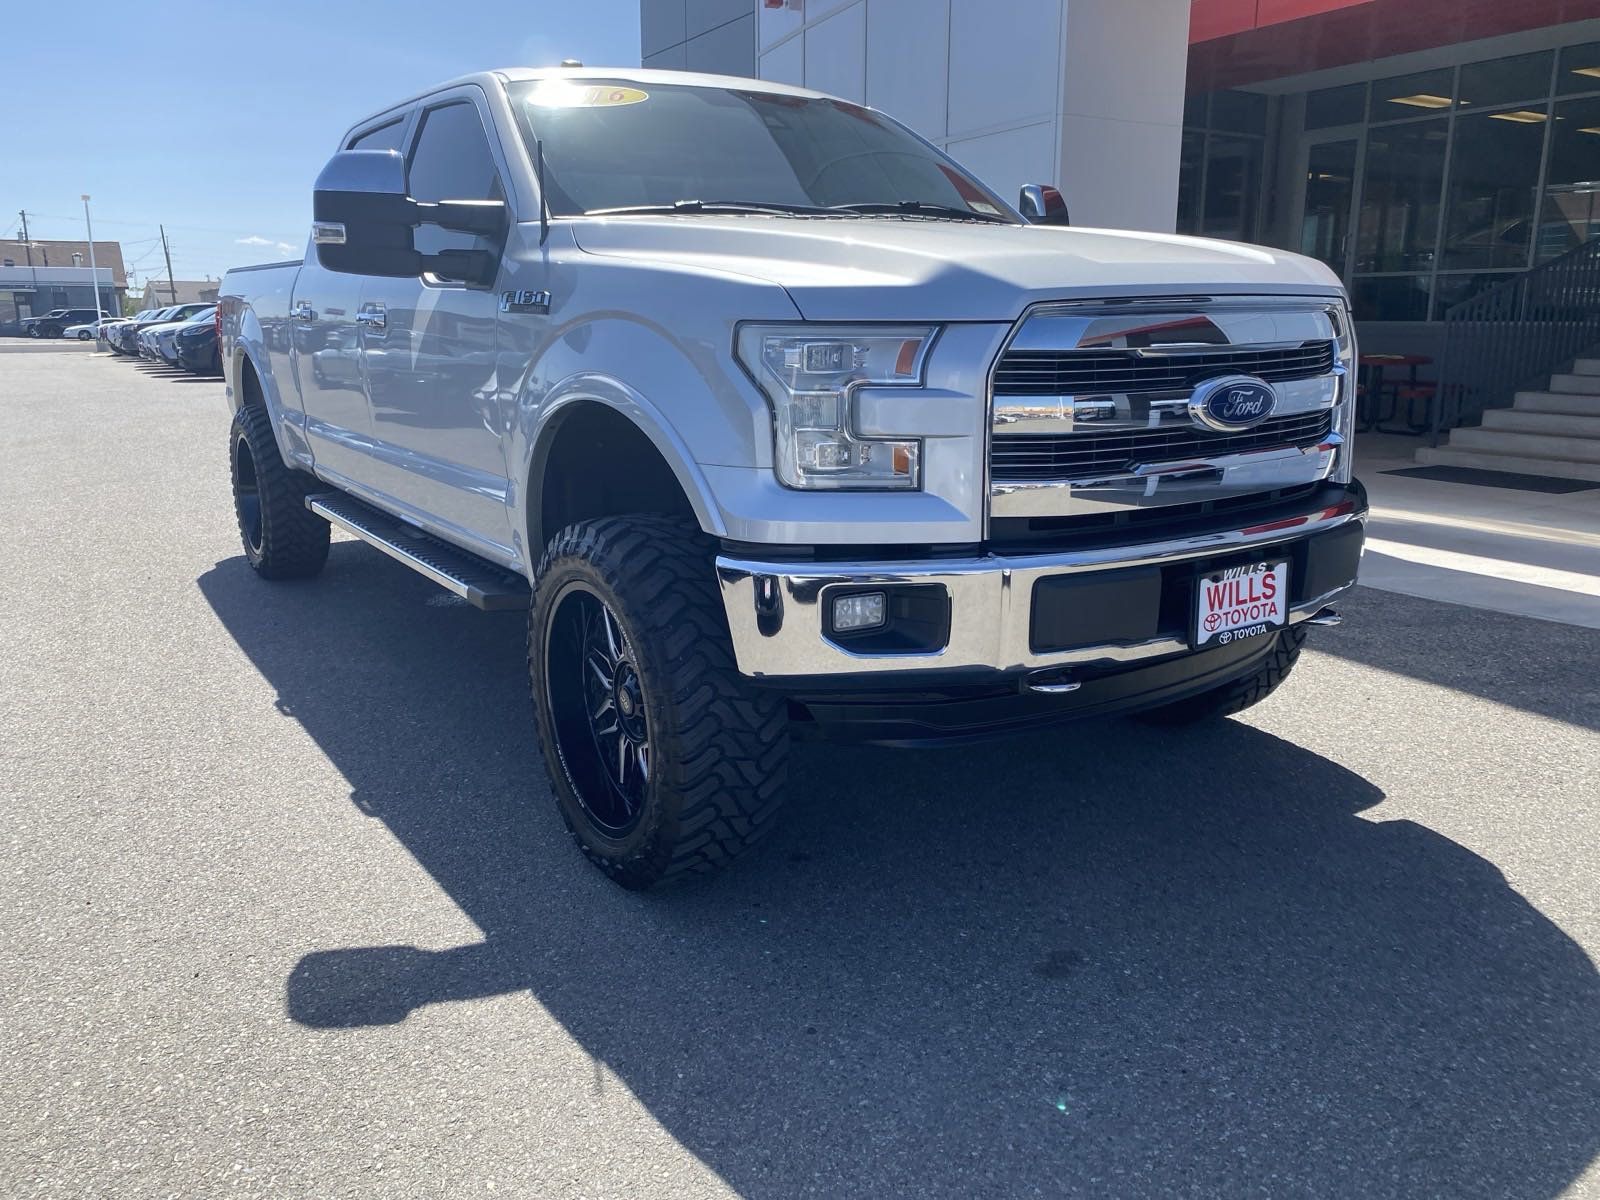 2016 - Ford - F-150 - $32,995